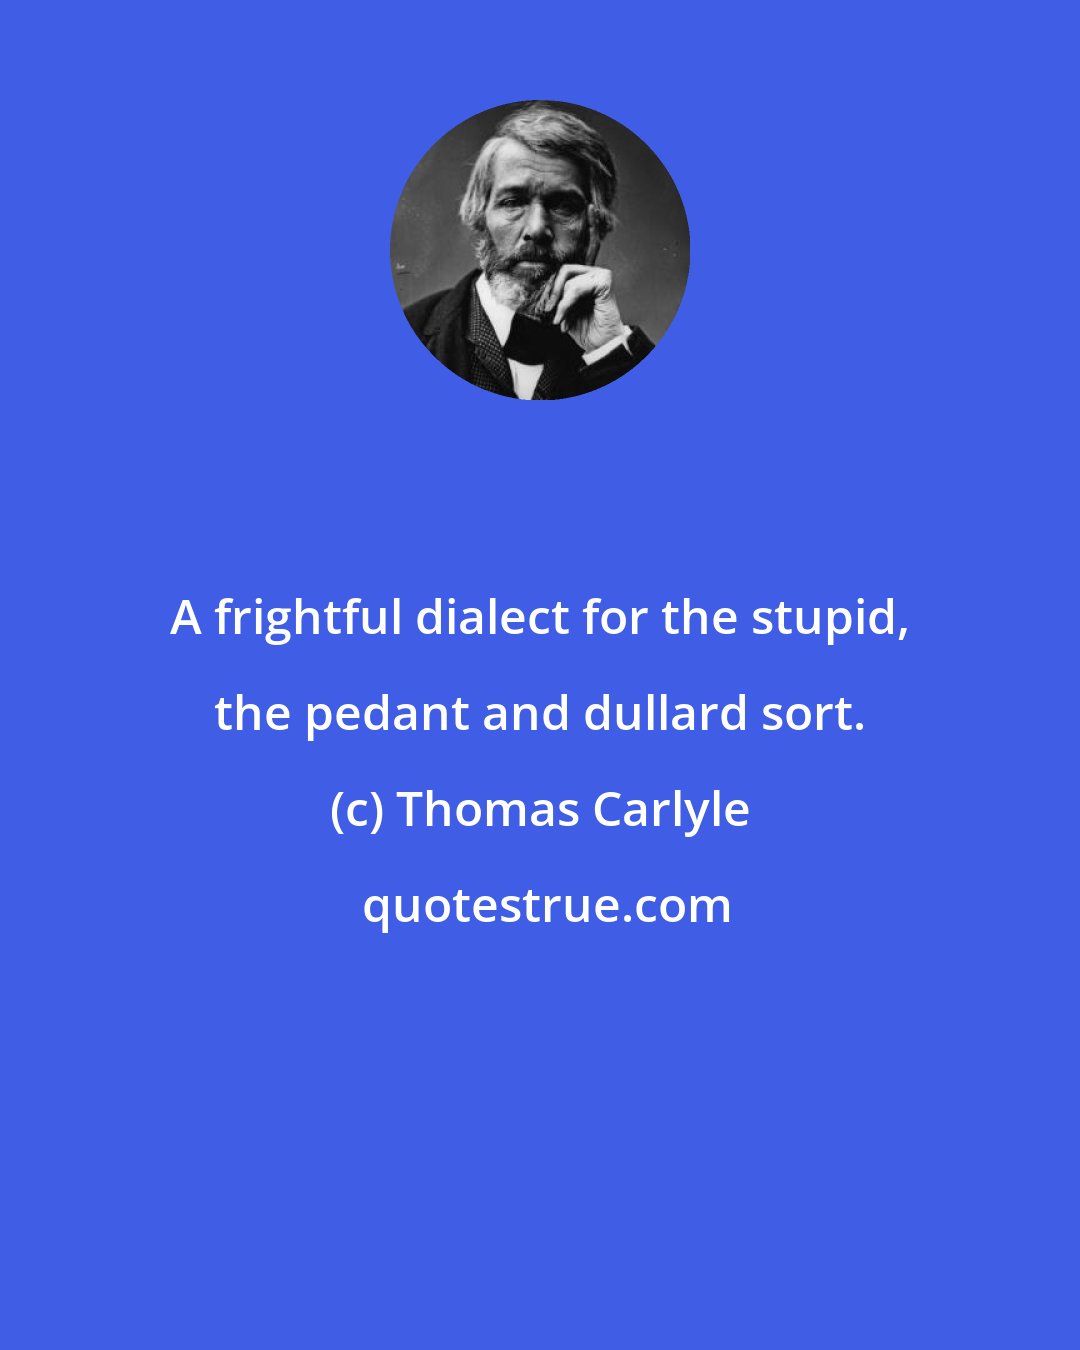 Thomas Carlyle: A frightful dialect for the stupid, the pedant and dullard sort.